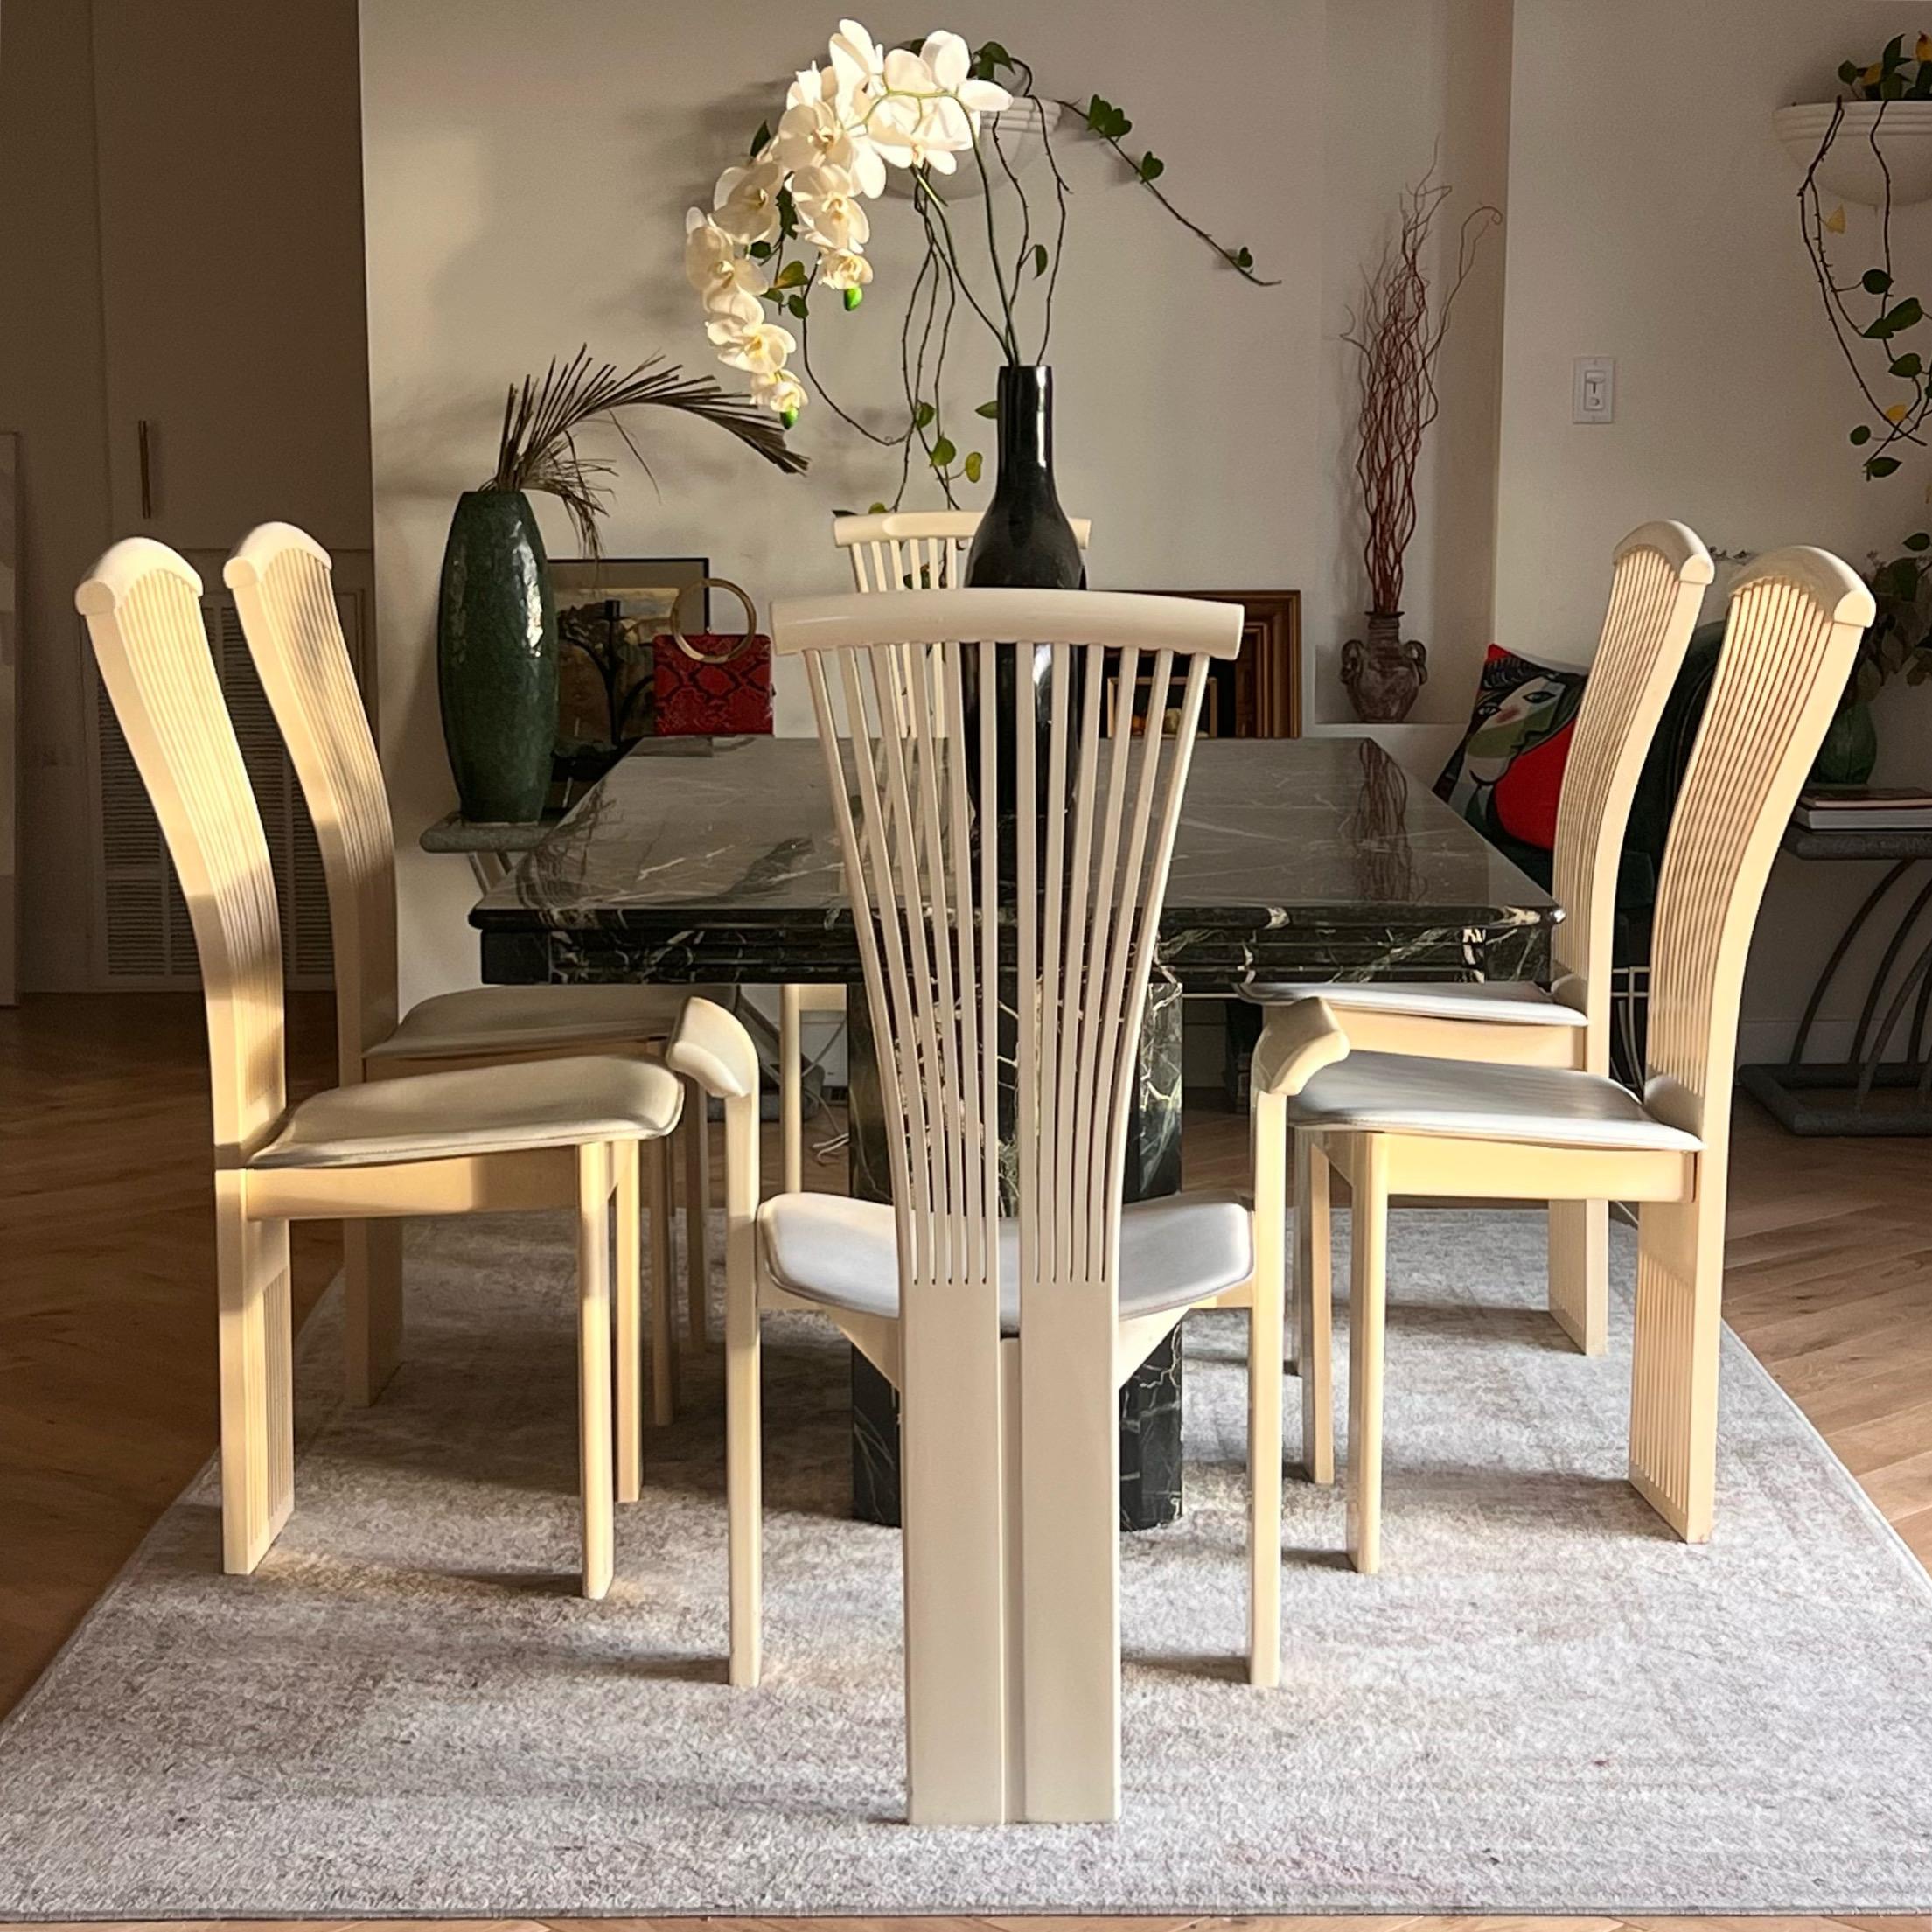 A set of six vintage Italian dining chairs after Pietro Costantini or Torstein Nilsen for Westnofa, mid to late 20th century. Featuring cream lacquered frames with white leather seats, and the classically Italian postmodern “fanned” backs. Some